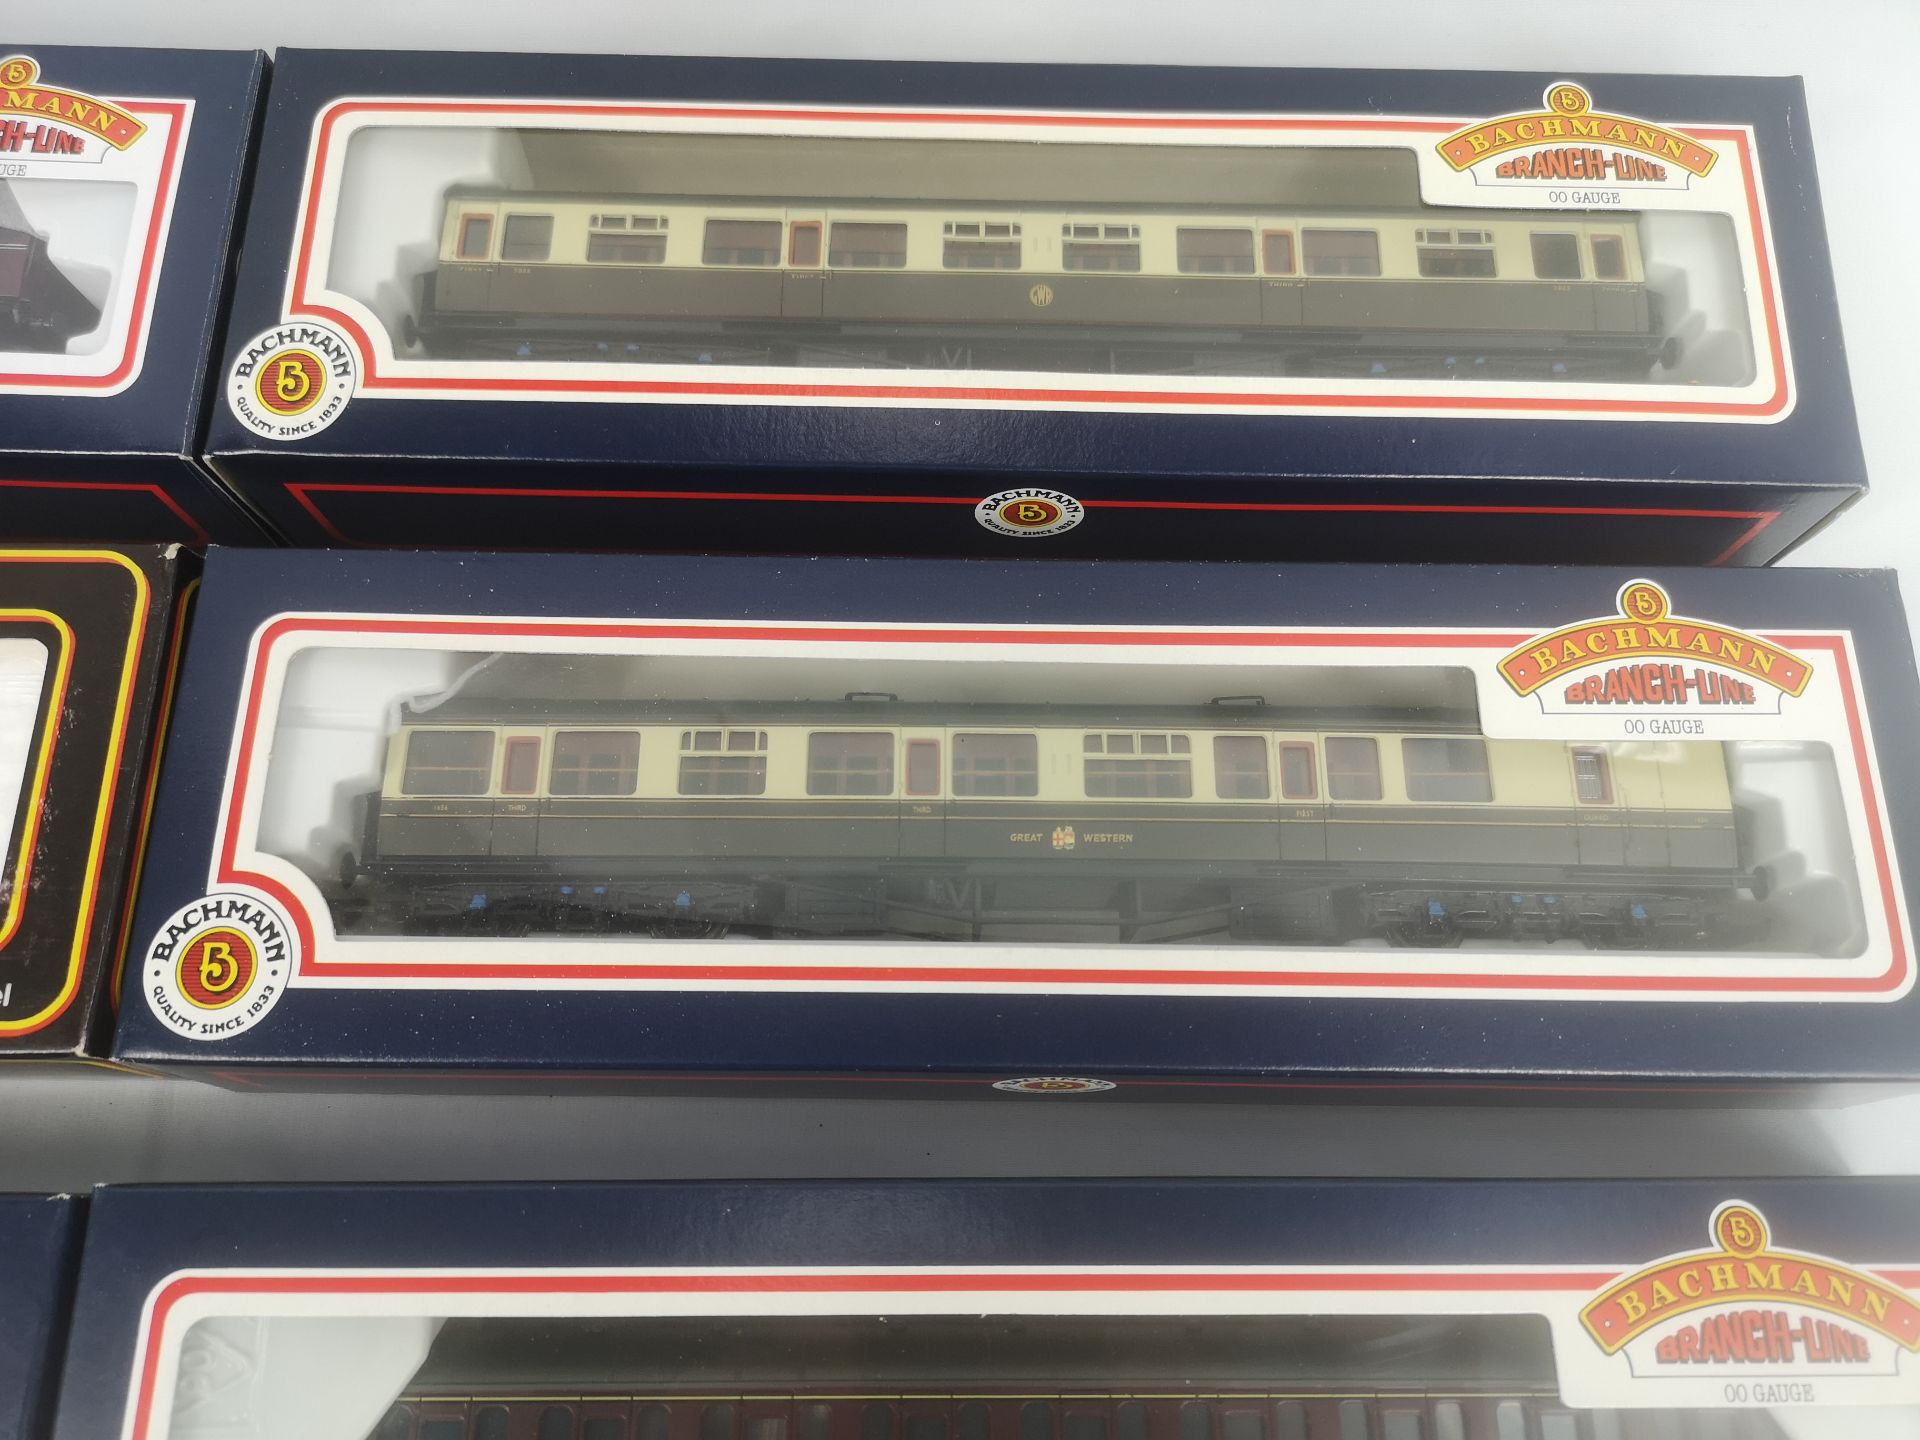 Boxed Mainline Railways locomotive with seve 00 gauge carriages - Image 6 of 6